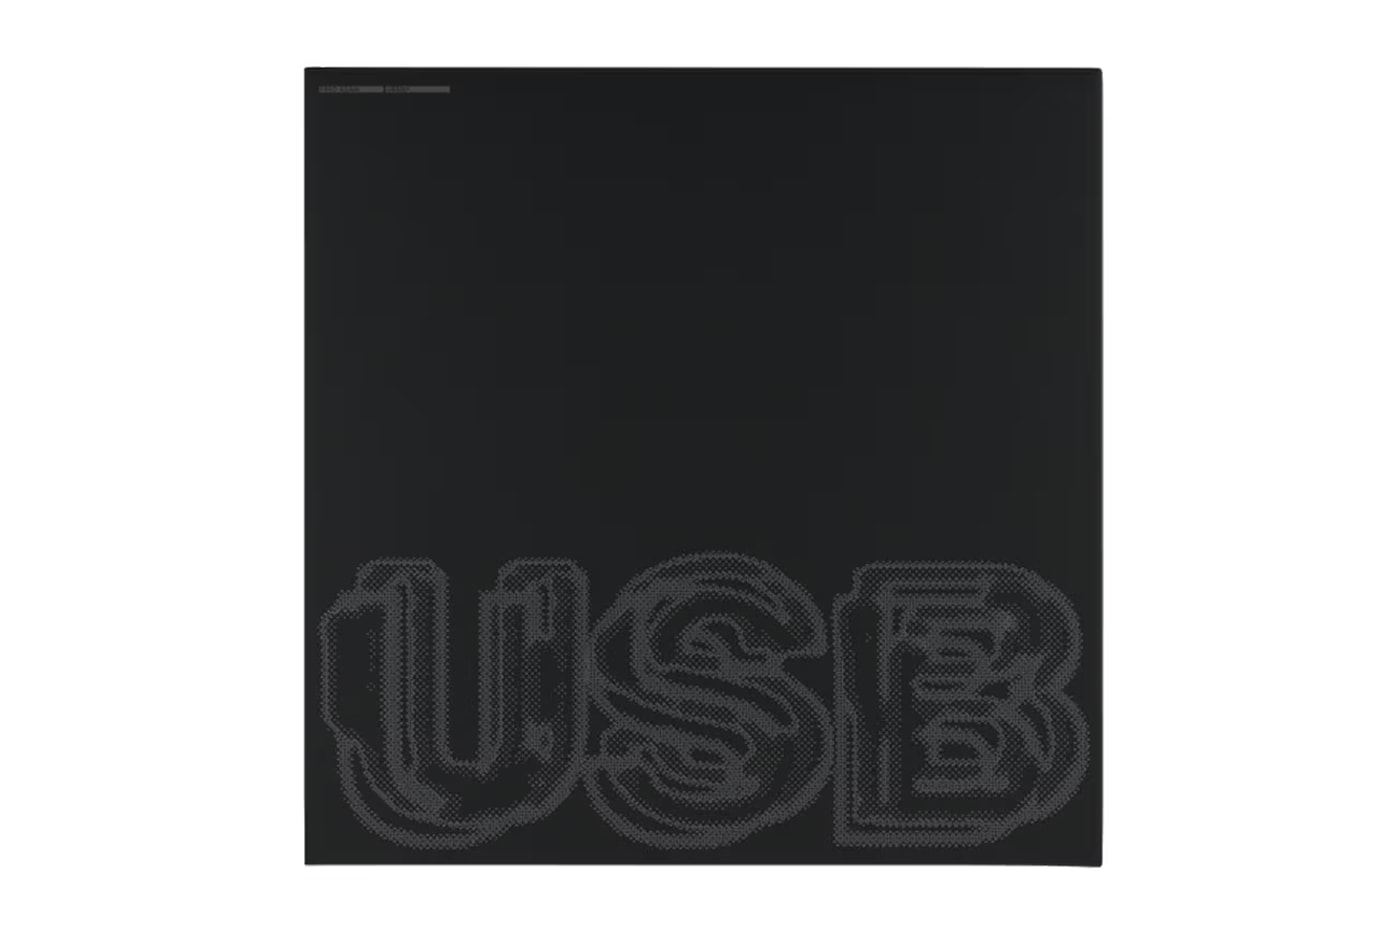 Fred Again.. Announces 'USB001' album project edm electronic dj producer link stream vinyl website jungle turn on the lights again swedish house mafia future rico nasty nia archives baby keem lil yachty overmono leavemealone stayinit song stream store